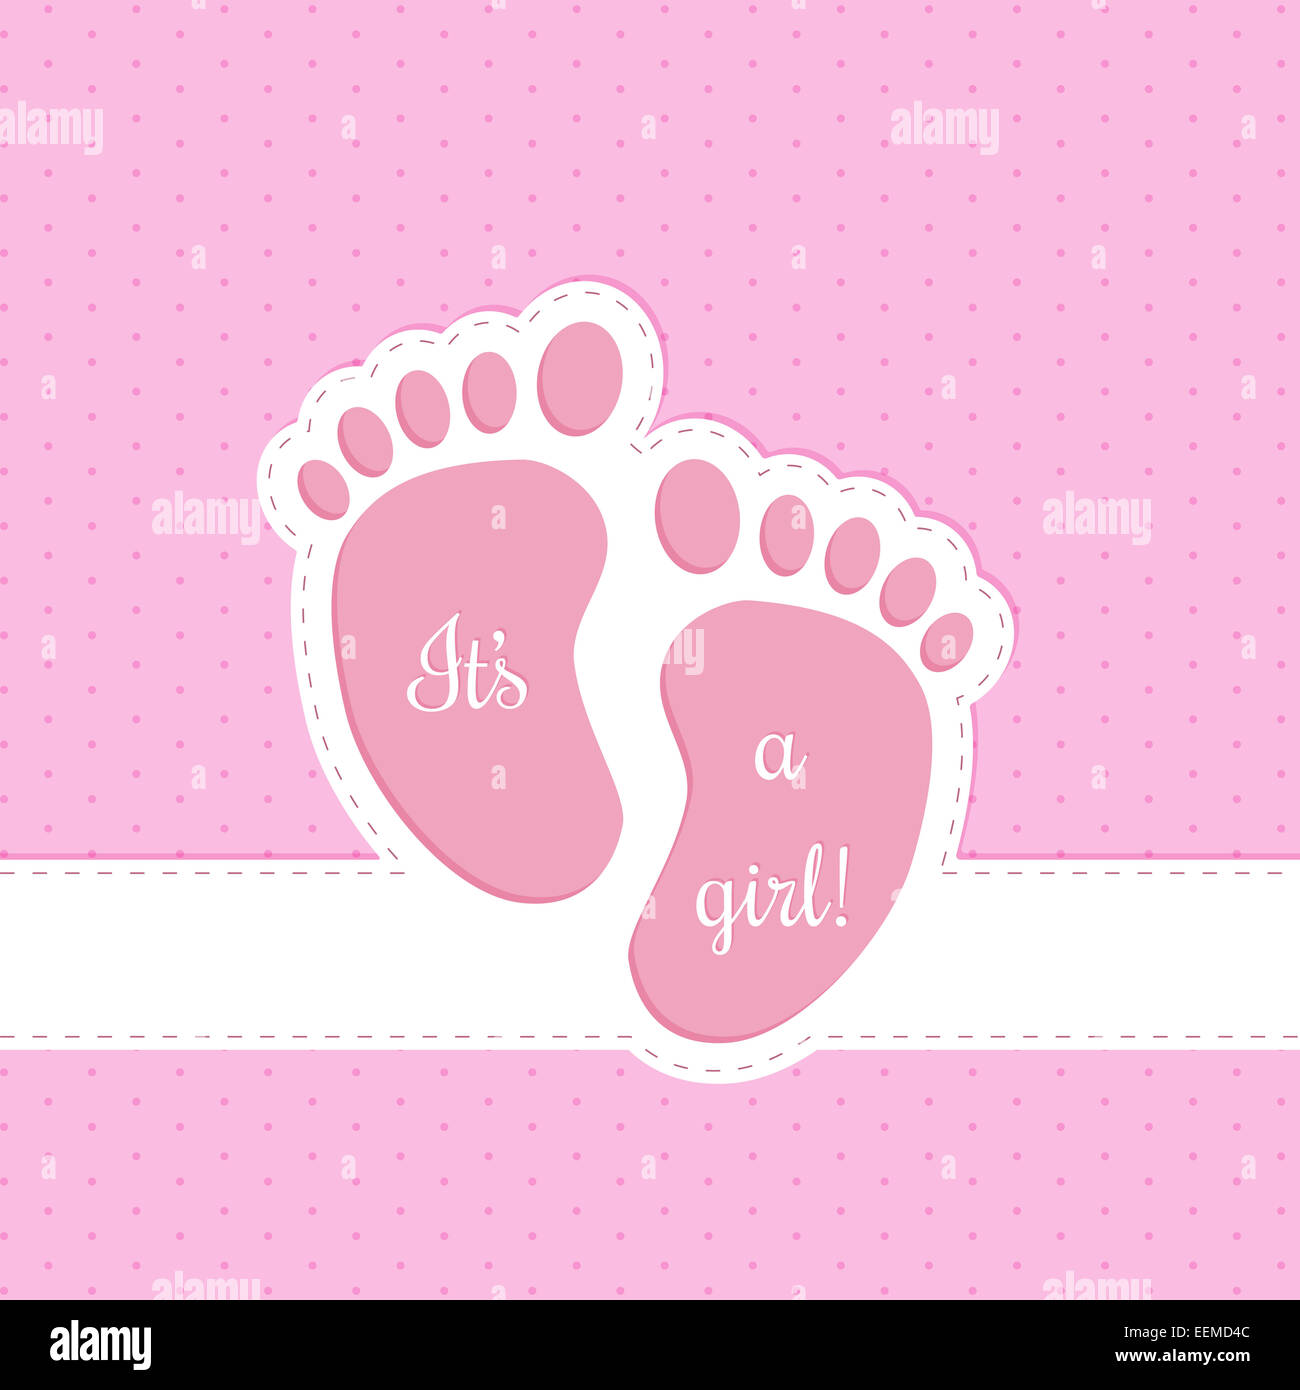 Baby shower greeting card invitation design for baby girls Stock Photo